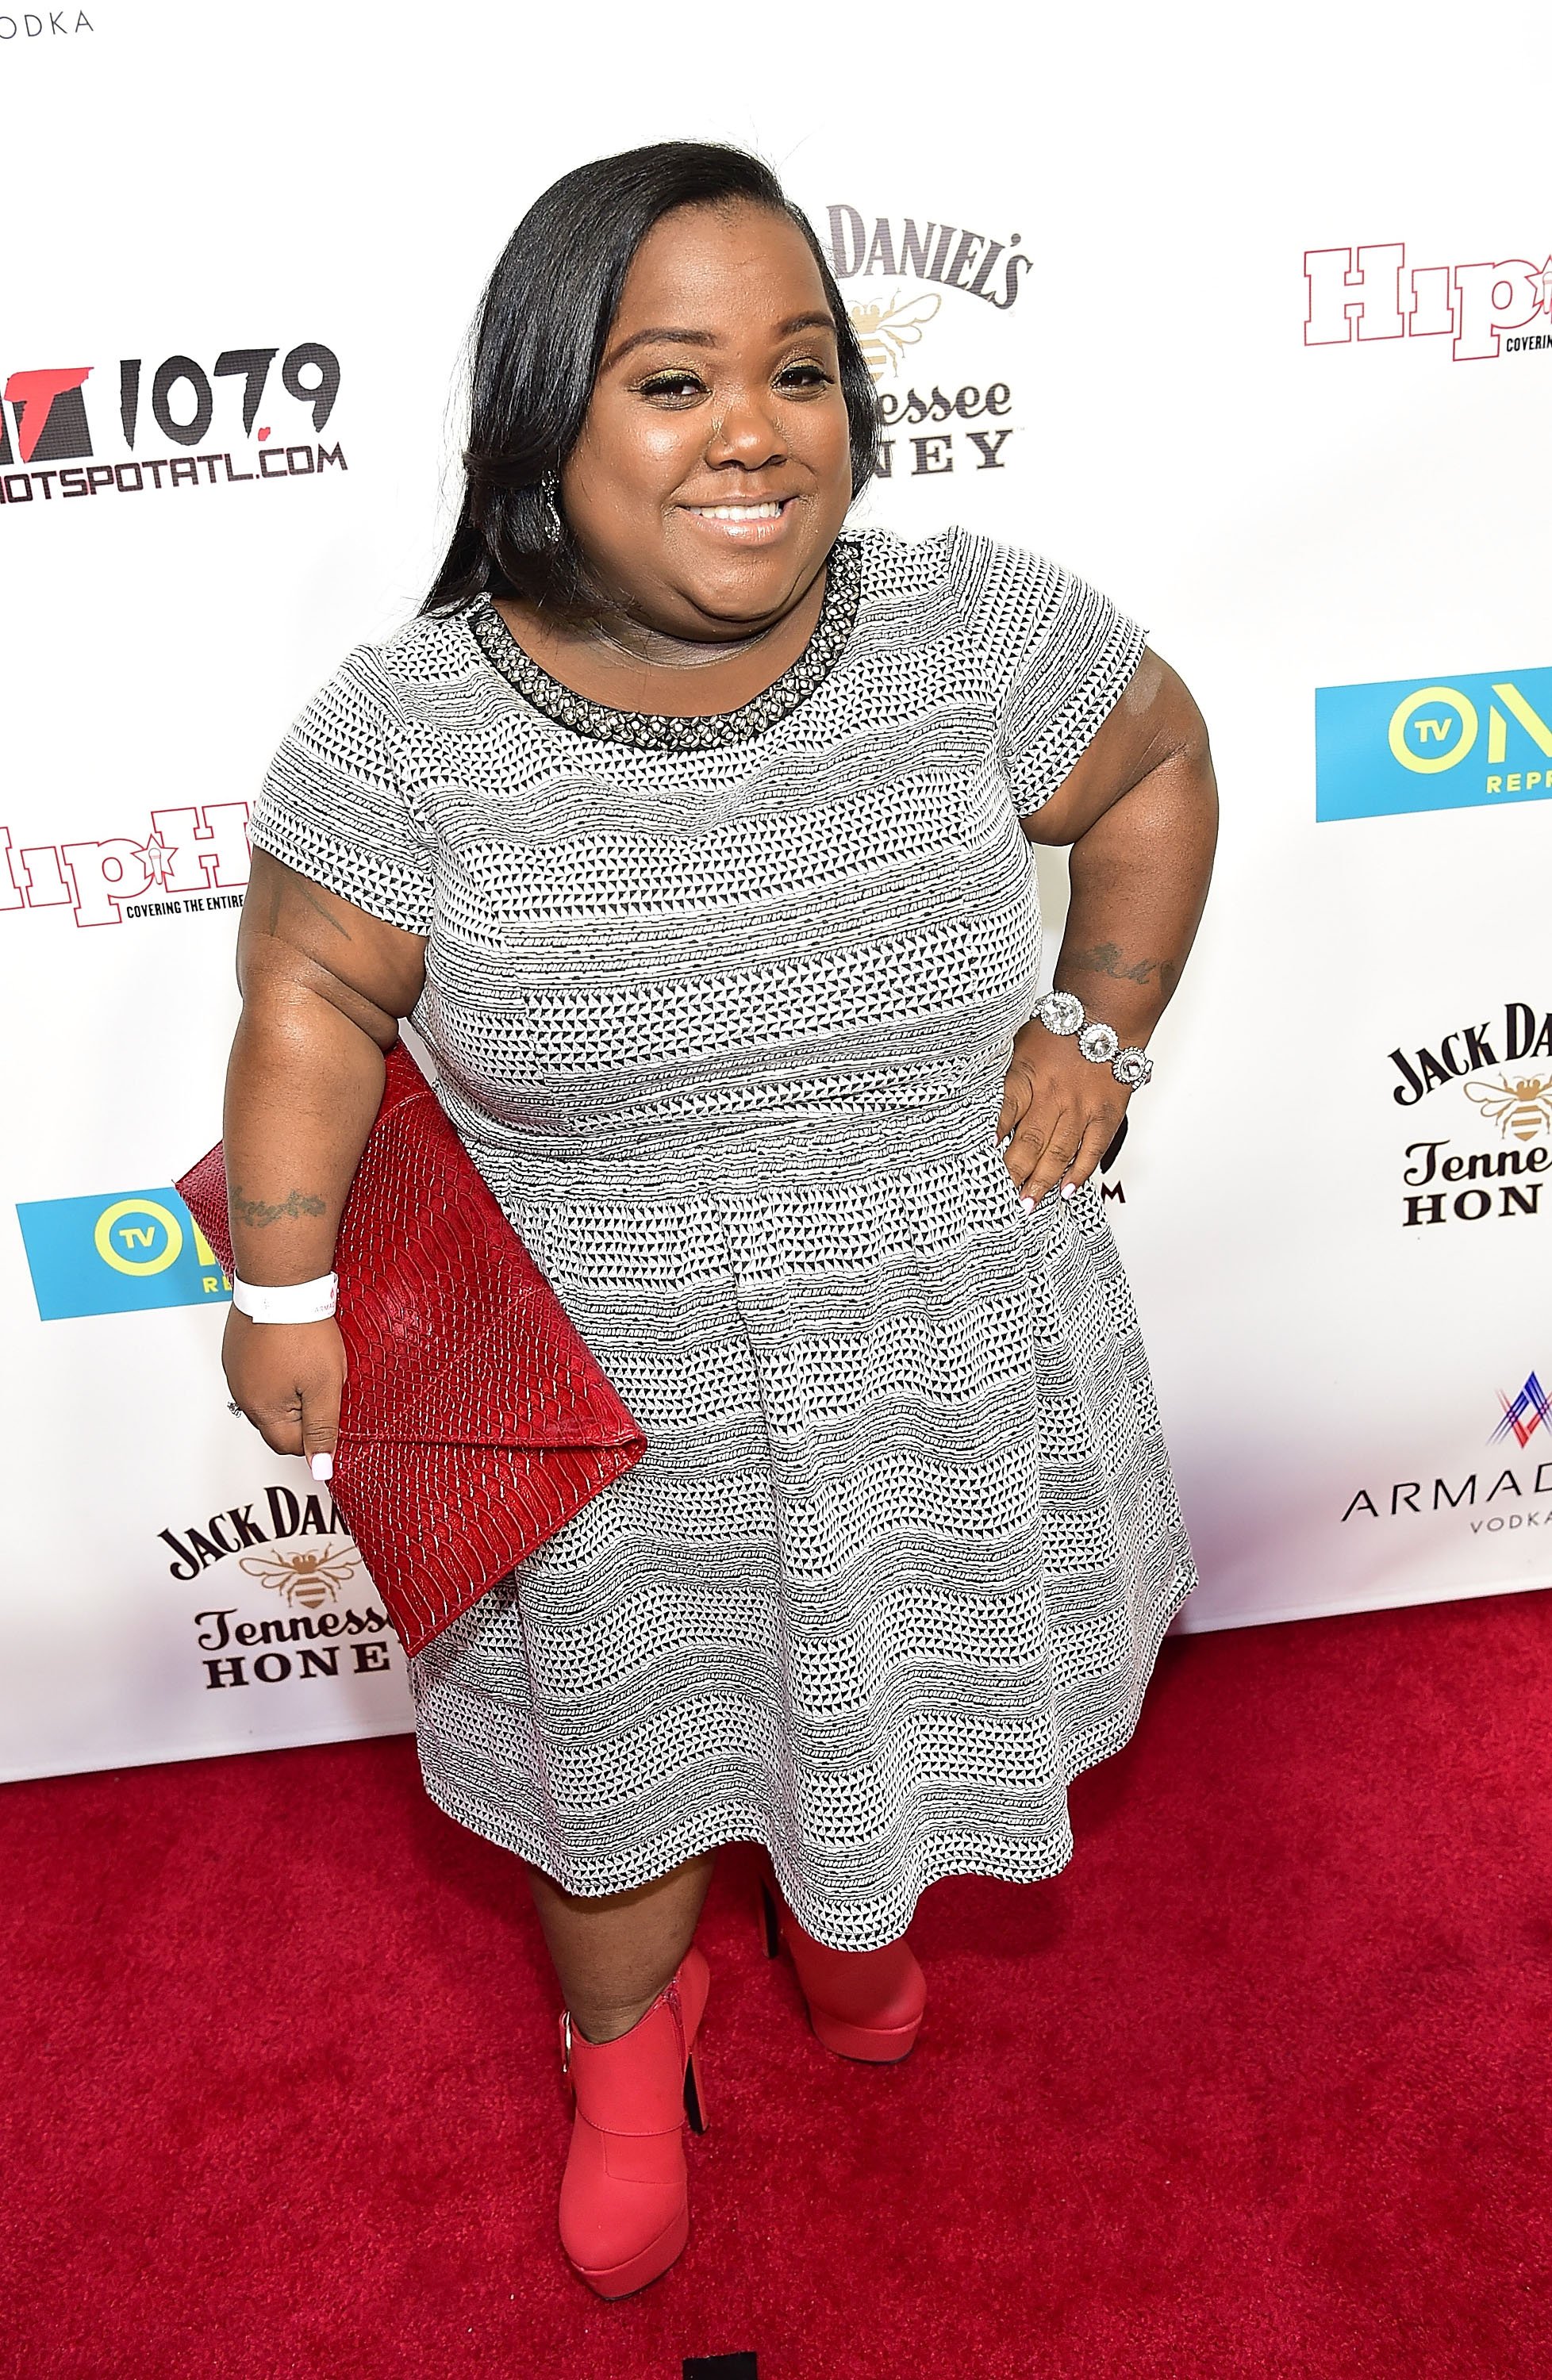 Ashley "Minnie" Ross attends "The Next 15" Atlanta screening on February 10, 2016, in Atlanta, Georgia. | Source: Getty Images.